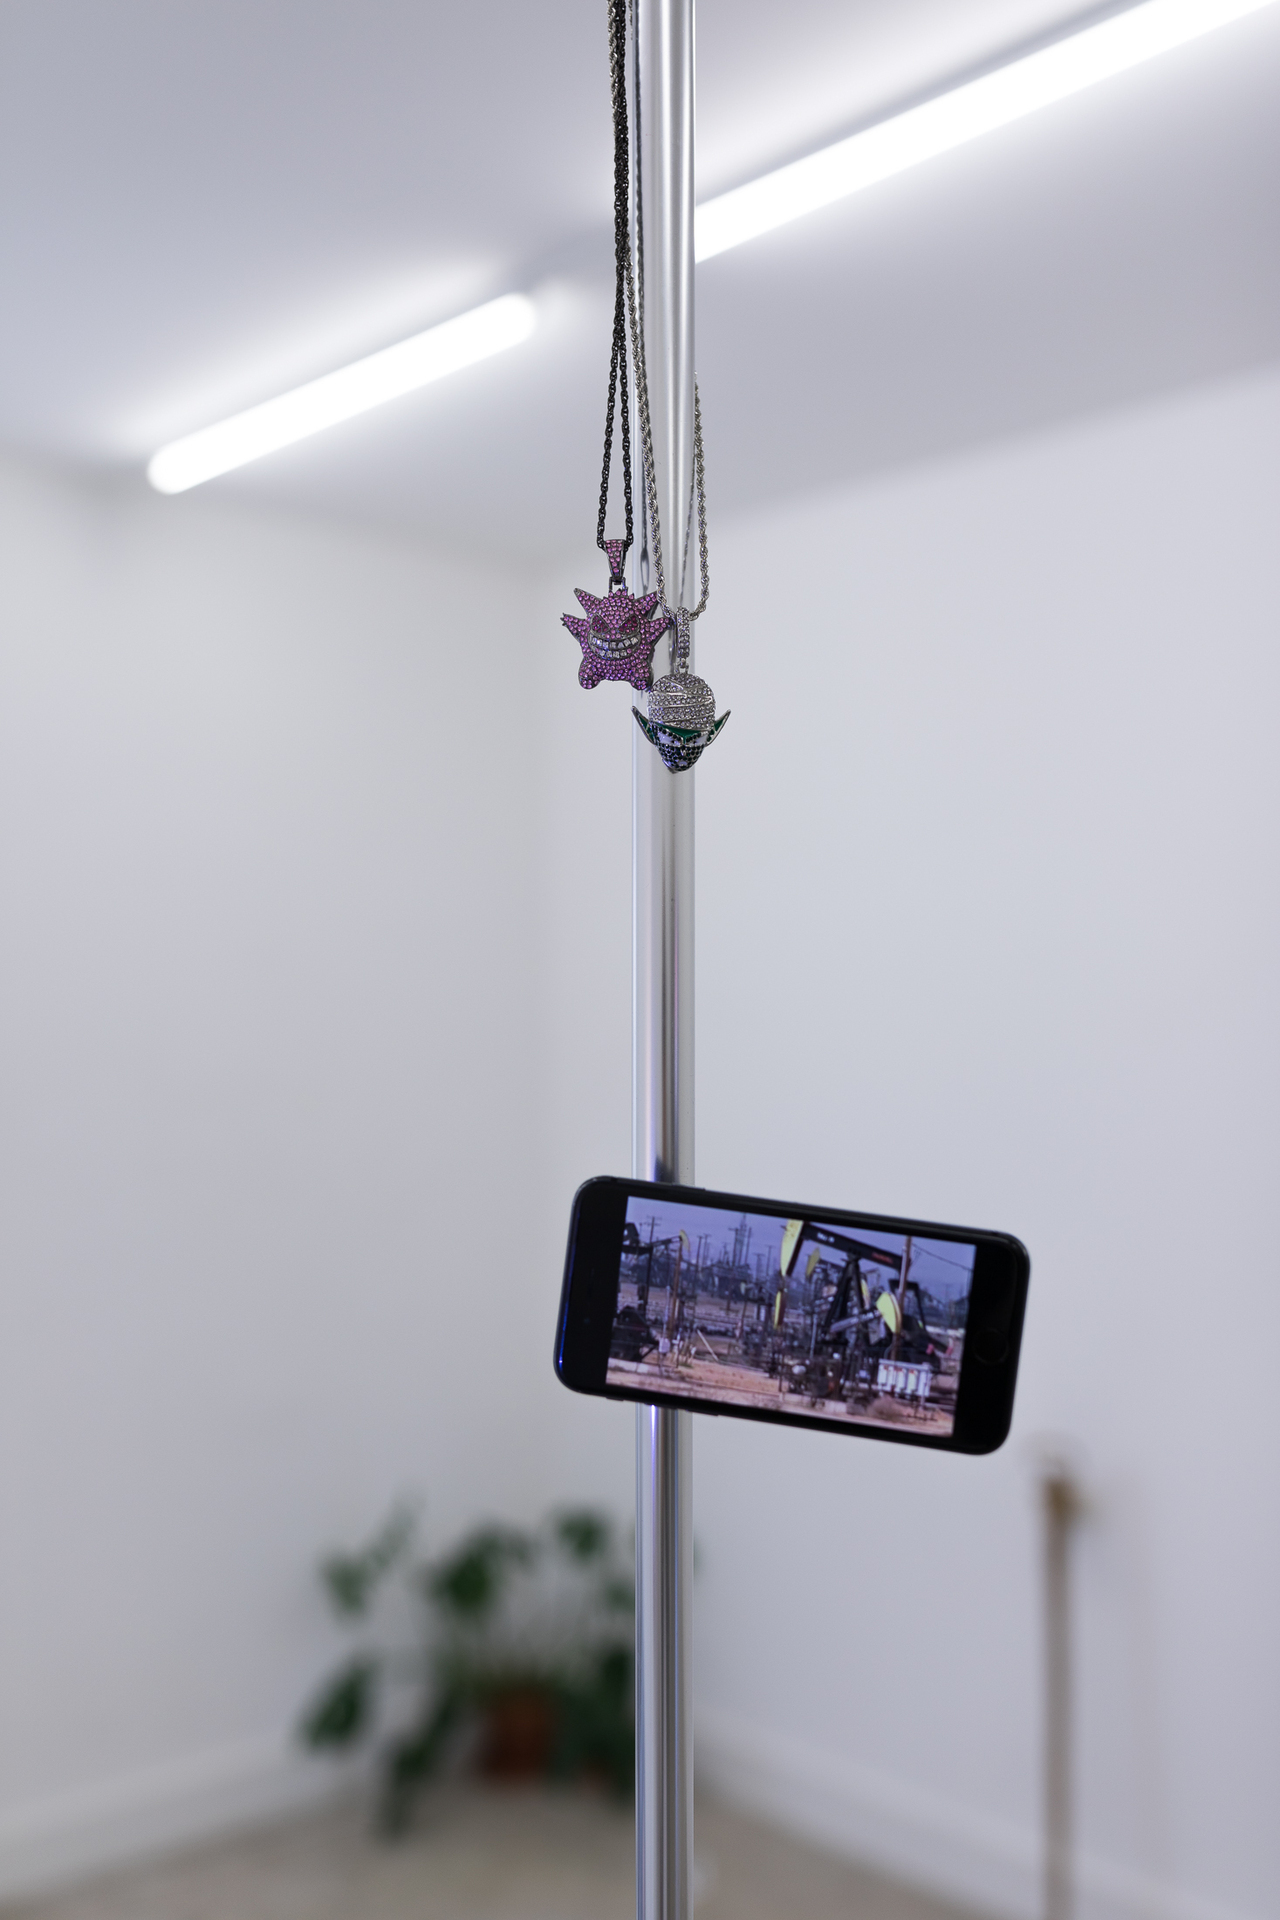 Diego Salvador Rios, I still believe I am (object-videotuneVersion4"RealLifeShoes"Dedicated2JeronimHorvat), 2021, Mixed, Dimensions Variable